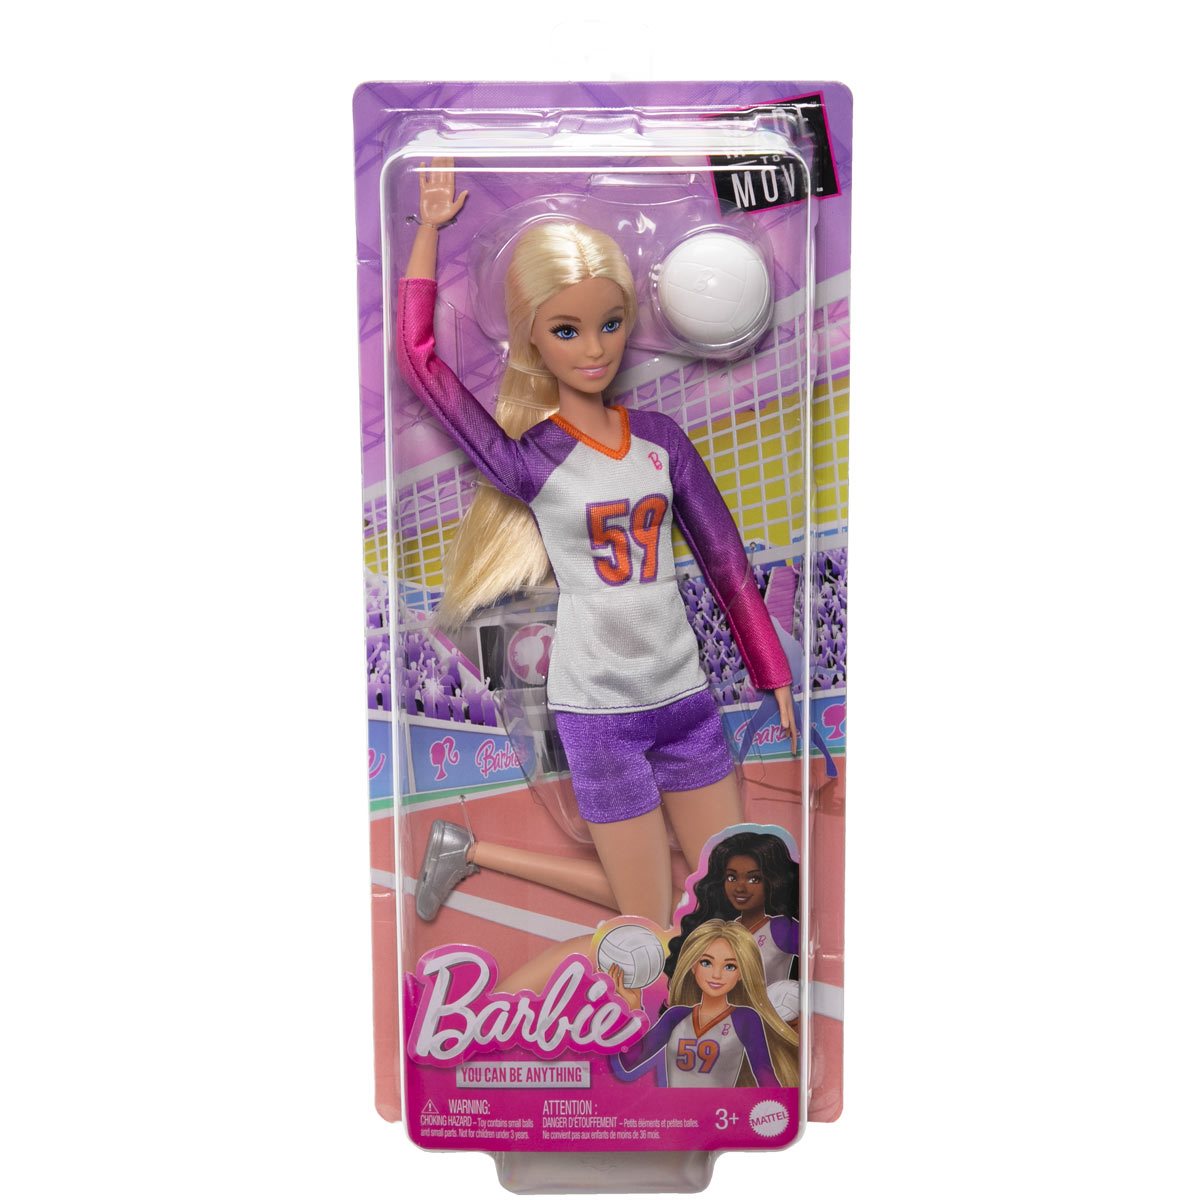 Barbie Made to Move Tennis Player Doll - Entertainment Earth